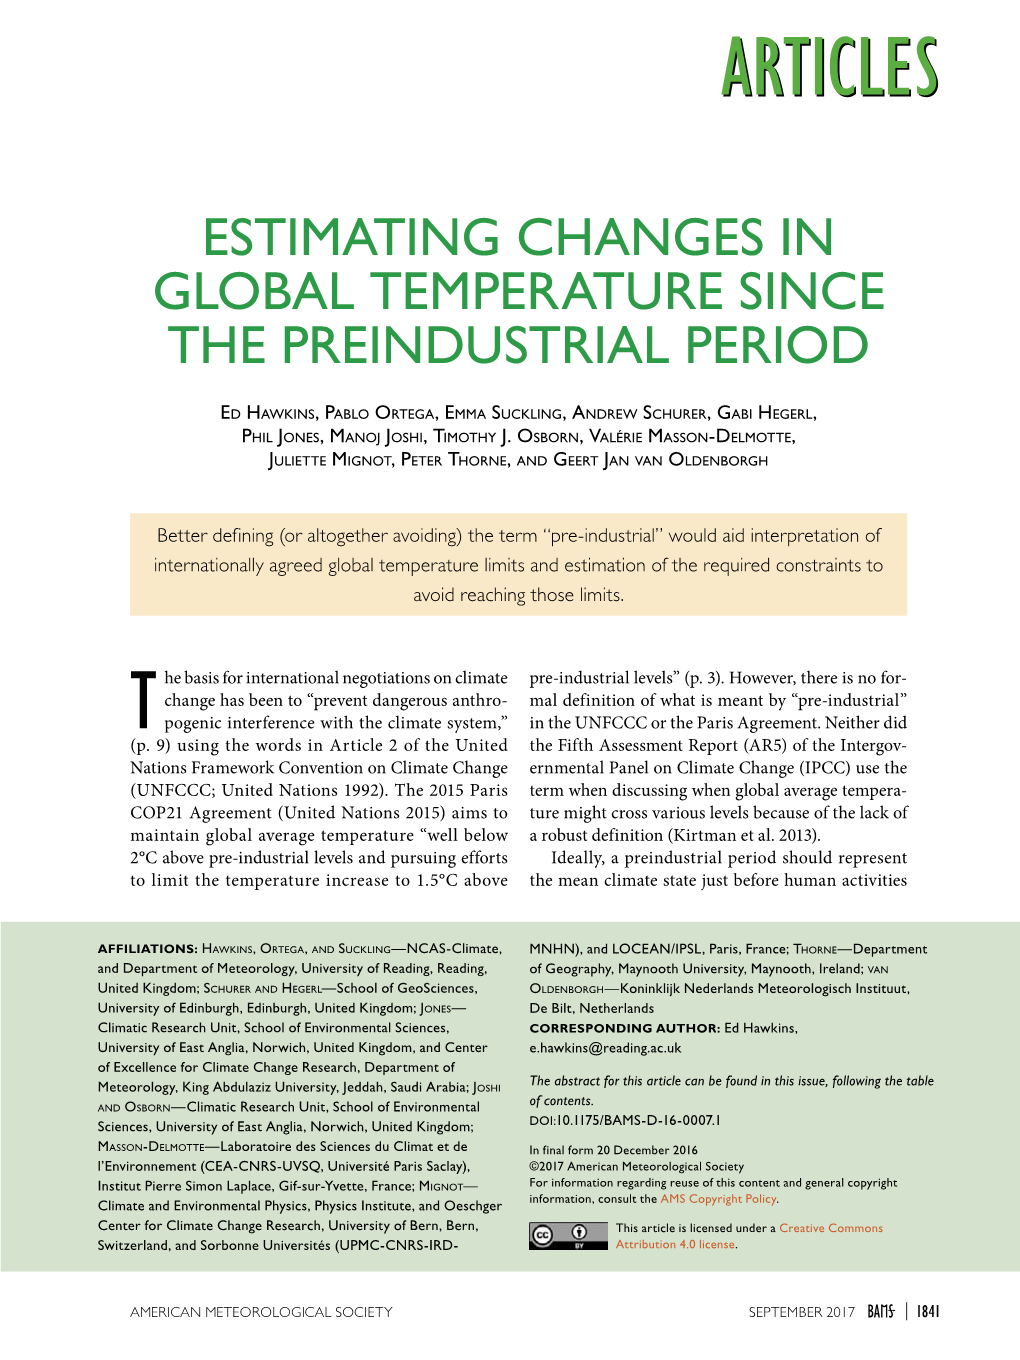 Estimating Changes in Global Temperature Since the Preindustrial Period